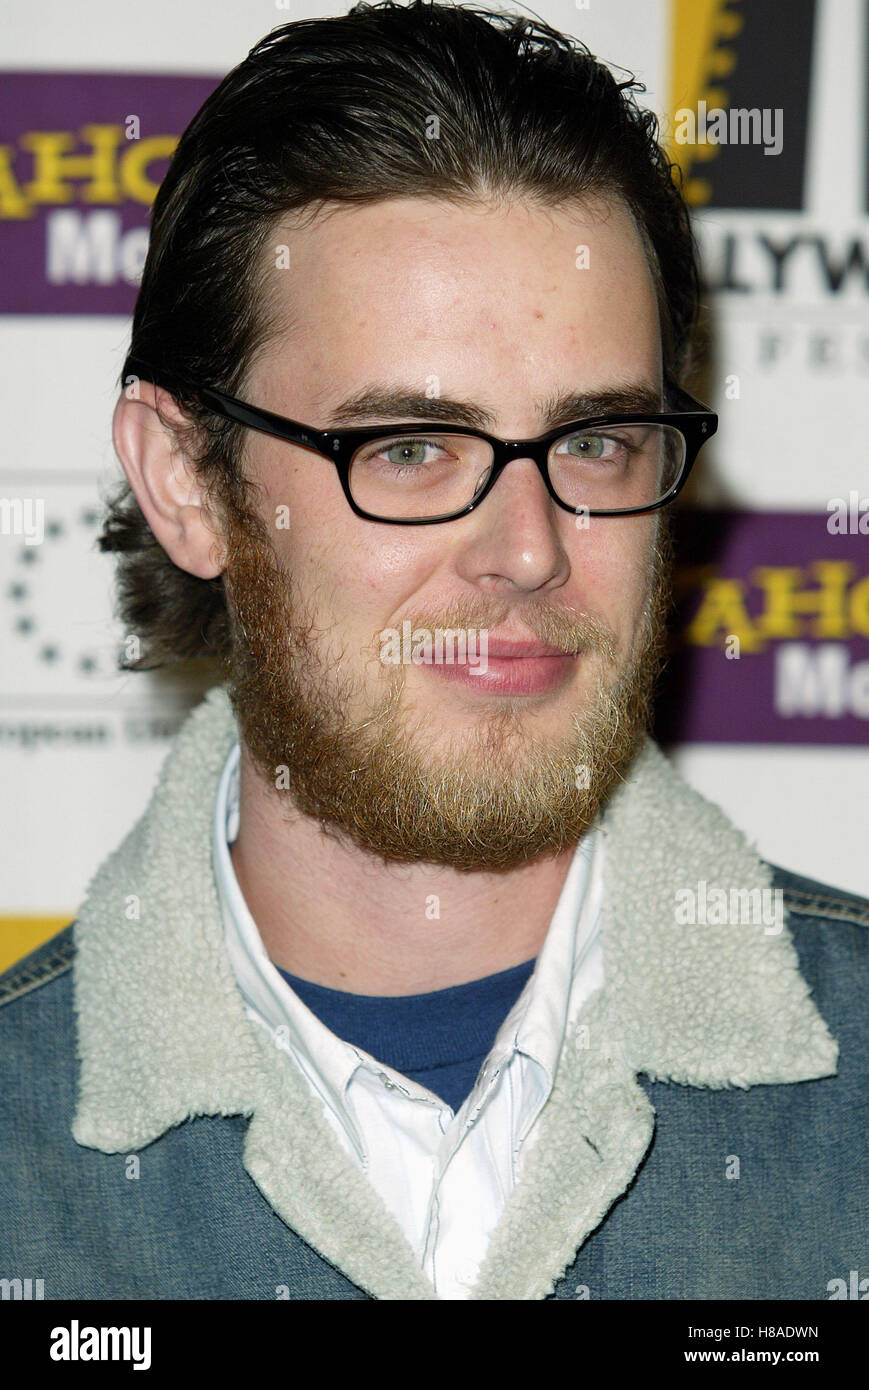 Colin hanks 11 14 film premiere hi-res stock photography and images - Alamy